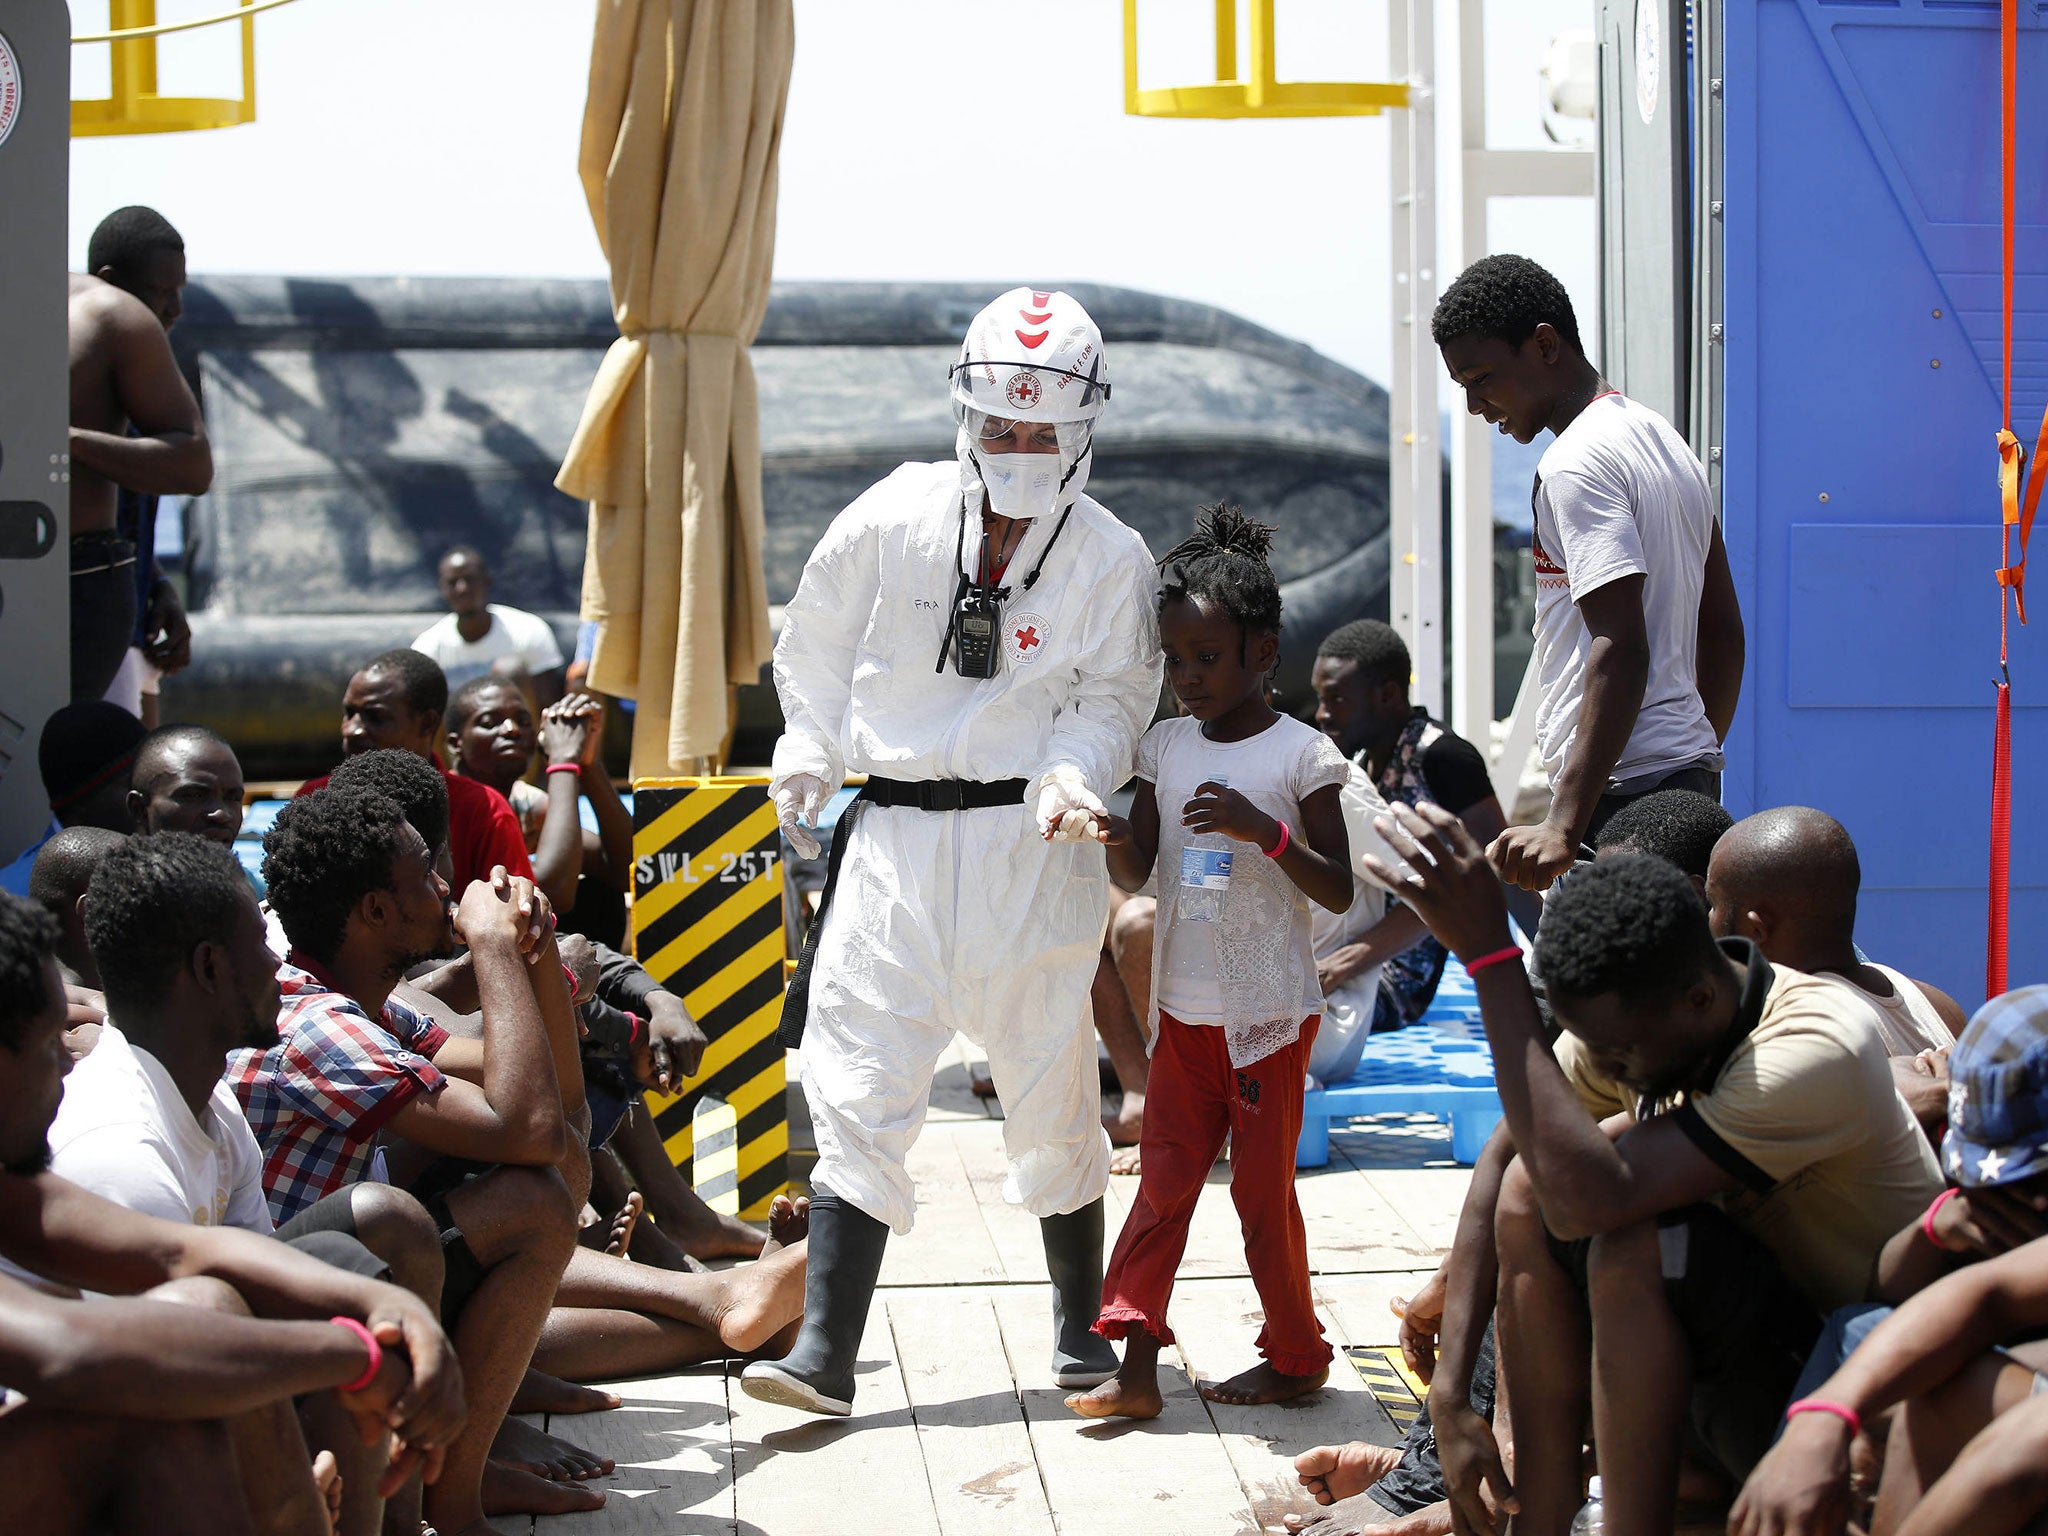 A Red Cross worker with child refugees in Sicily after a rescue operation on Thursday